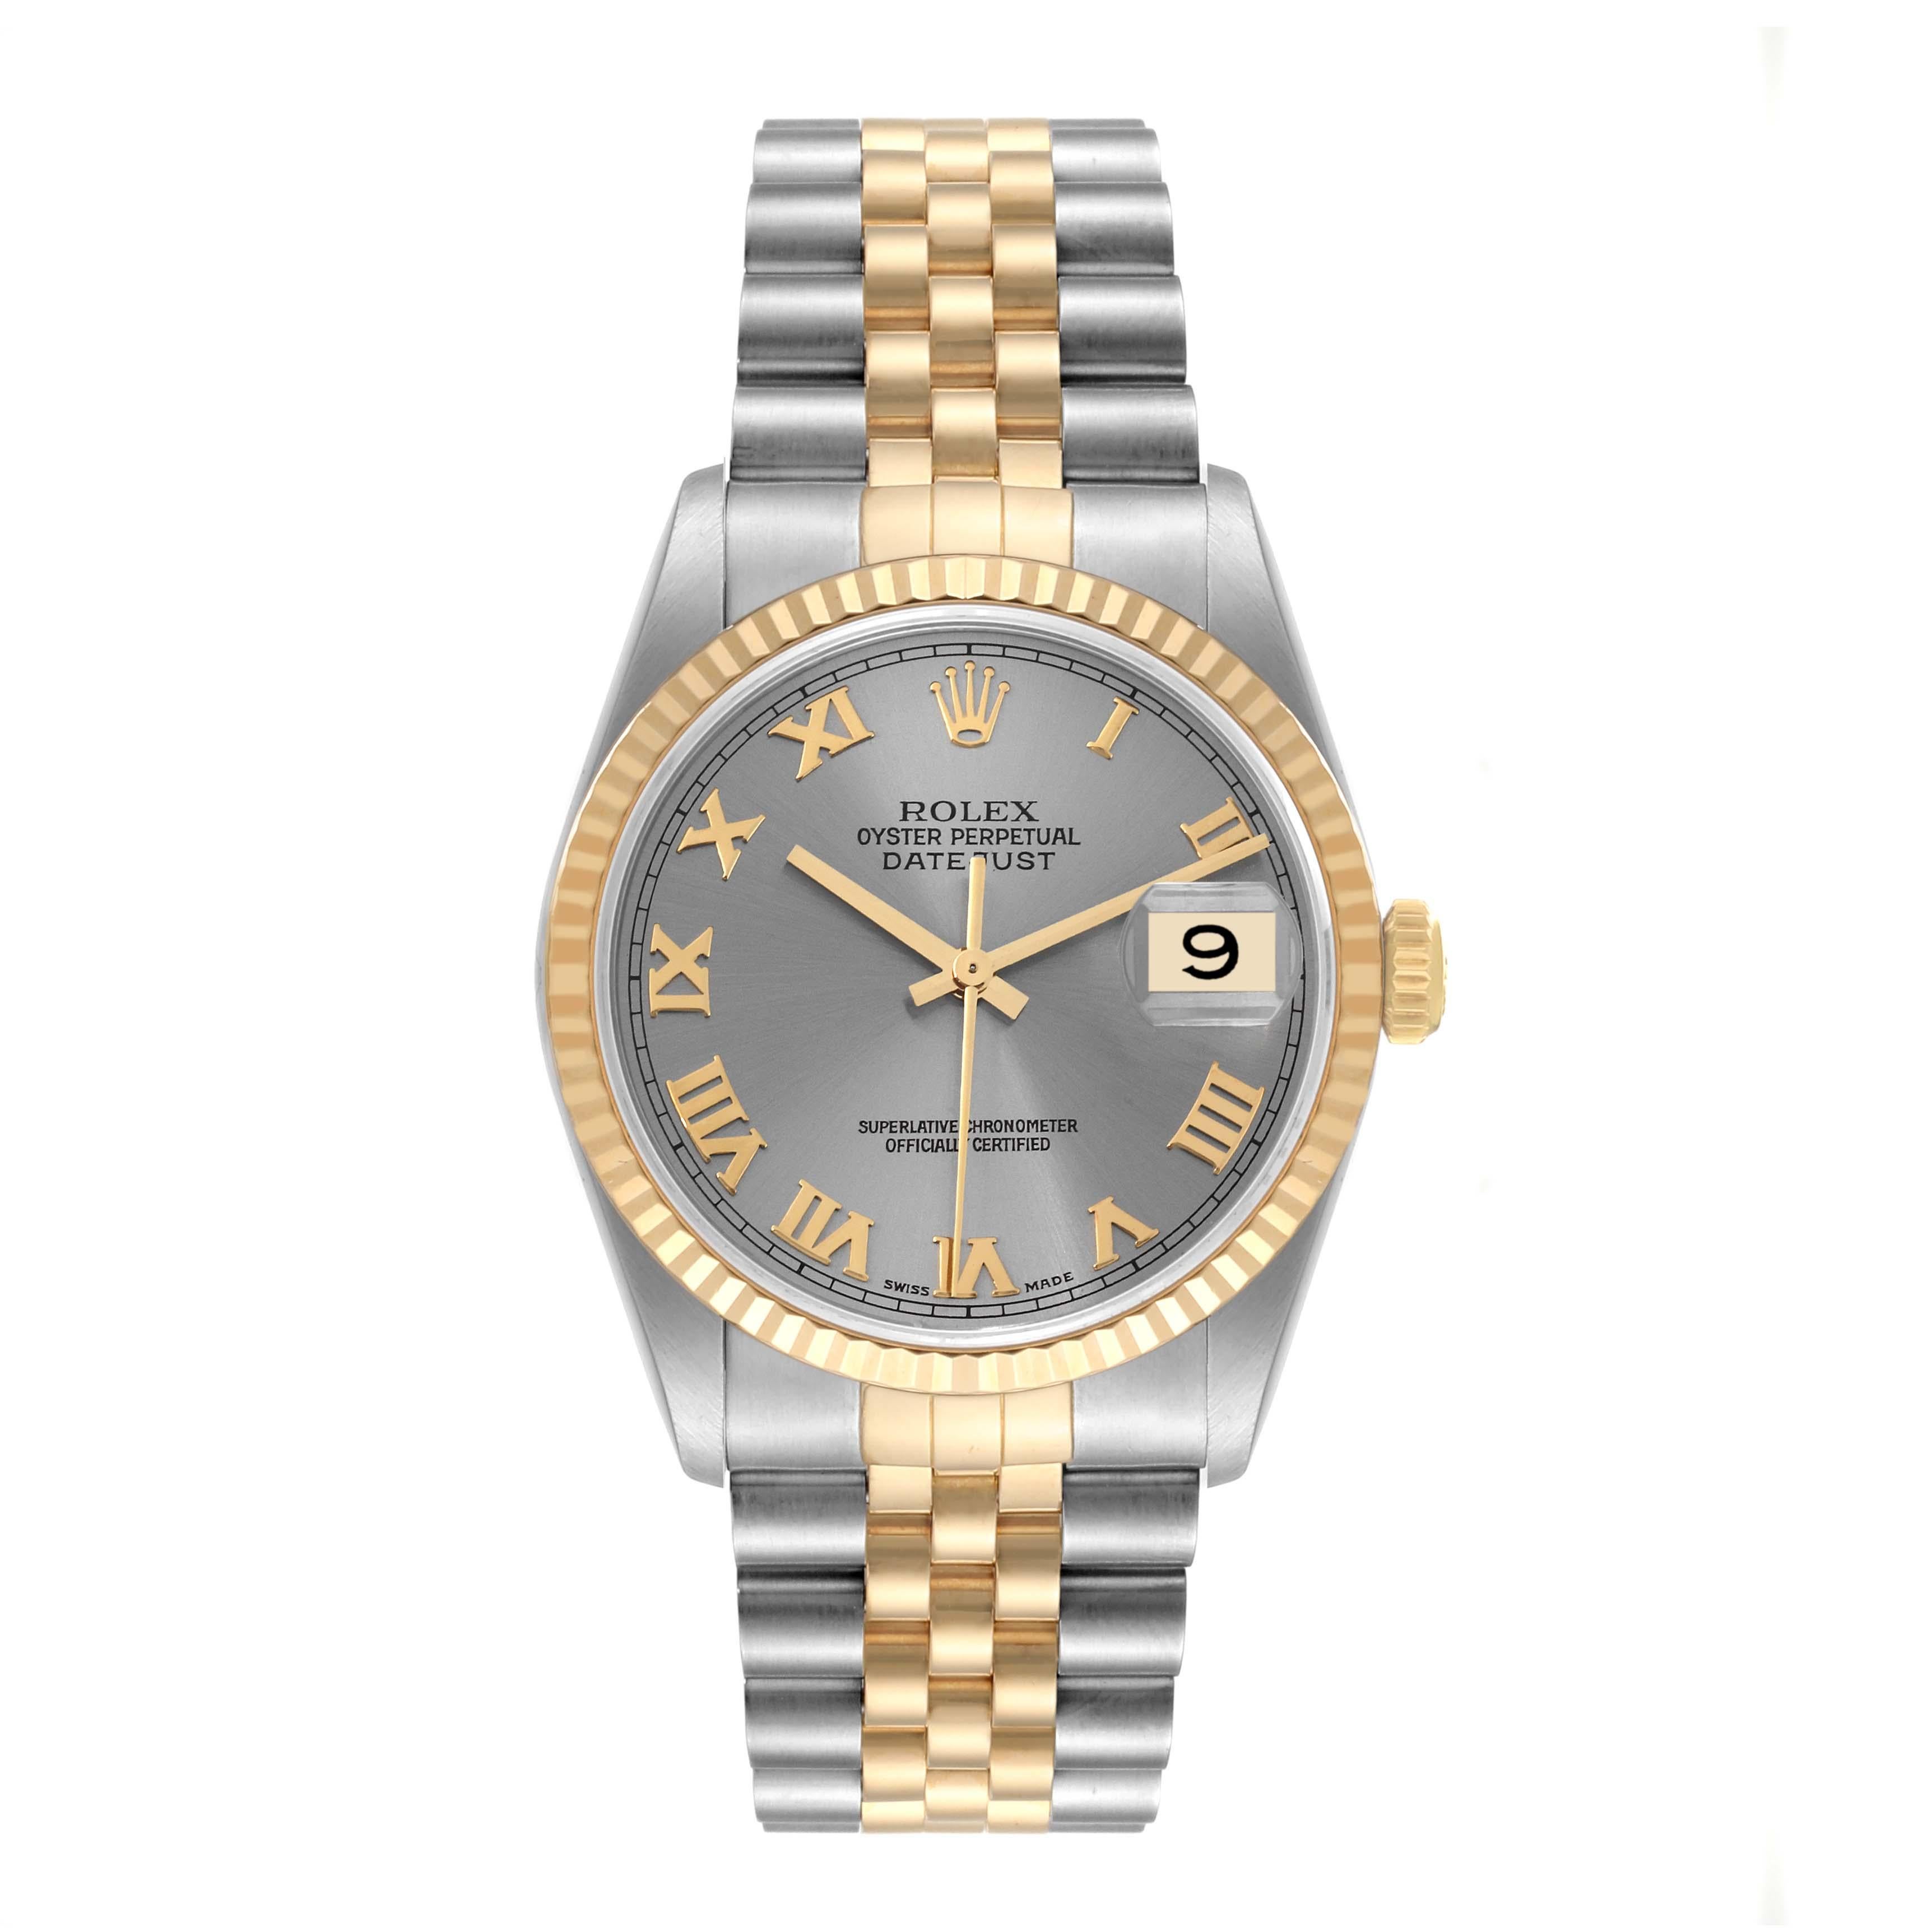 Rolex Datejust Stainless Steel Yellow Gold Mens Watch 16233. Officially certified chronometer automatic self-winding movement. Stainless steel case 36 mm in diameter.  Rolex logo on an 18K yellow gold crown. 18k yellow gold fluted bezel. Scratch